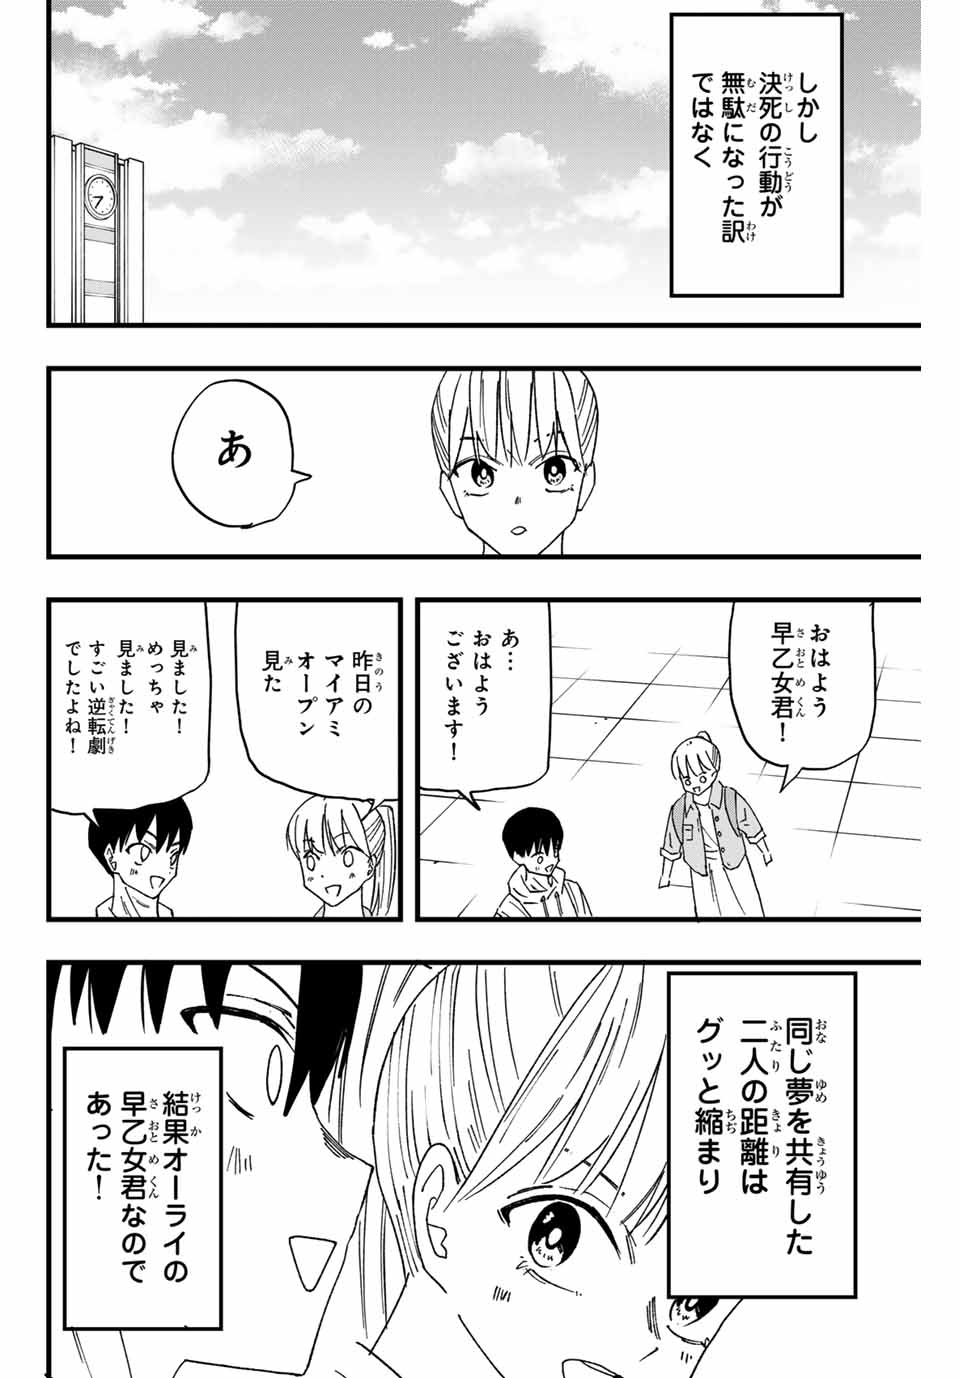 LoVE GAME 第2話 - Page 46